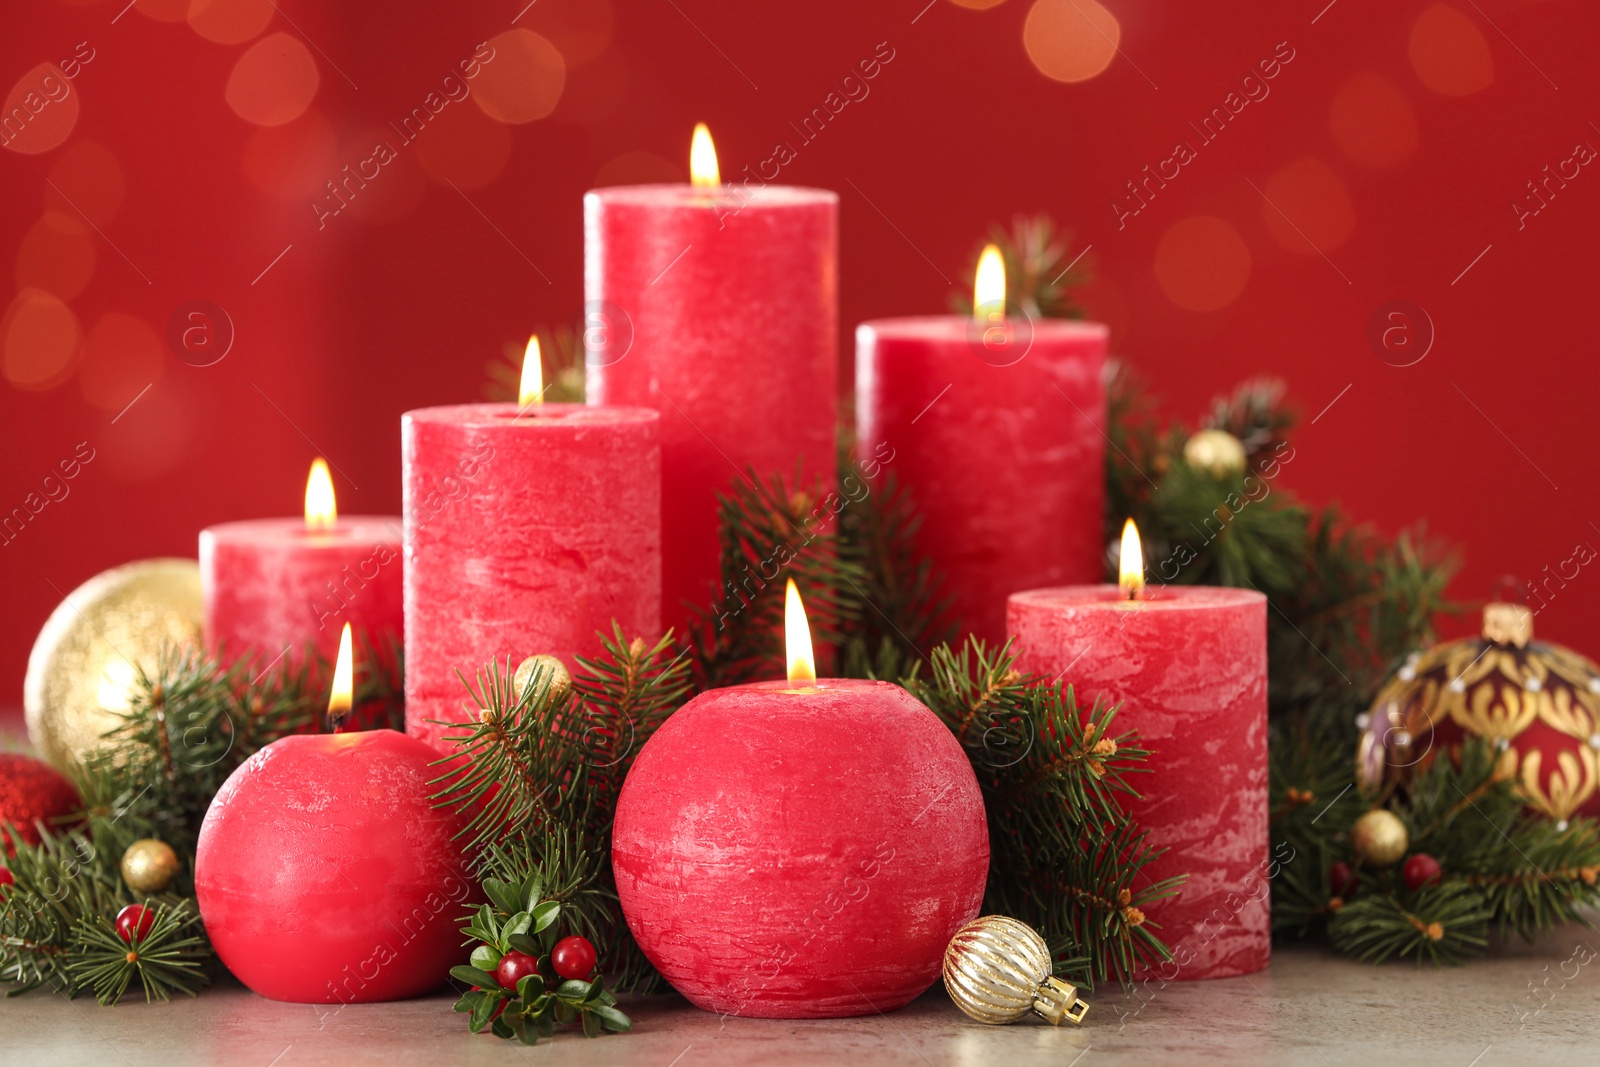 Photo of Burning candles and Christmas decor on table against red background with bokeh effect